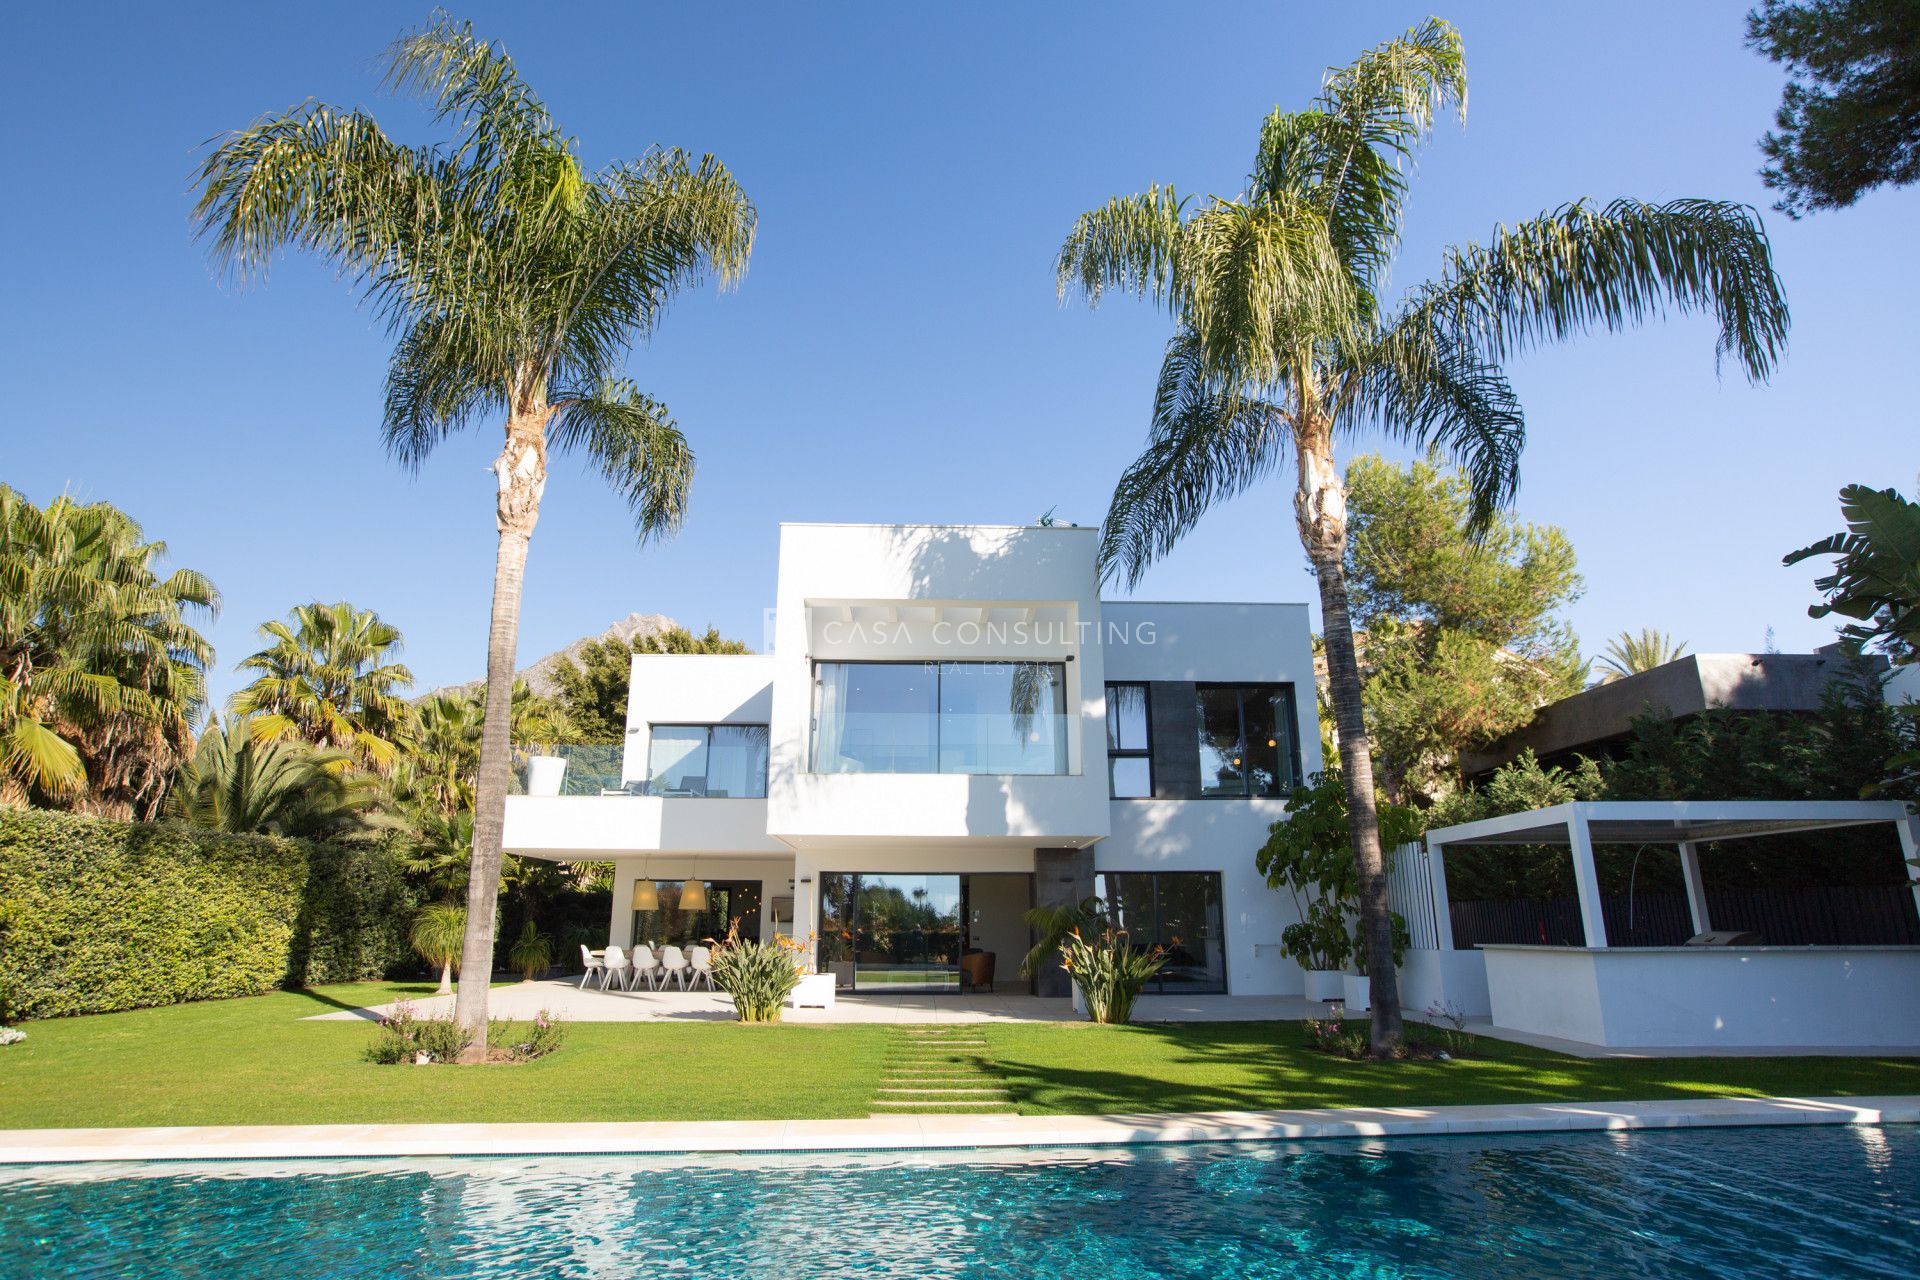 Exquisite five-bedroom villa, situated in a serene place in Rocio Nagueles, M...